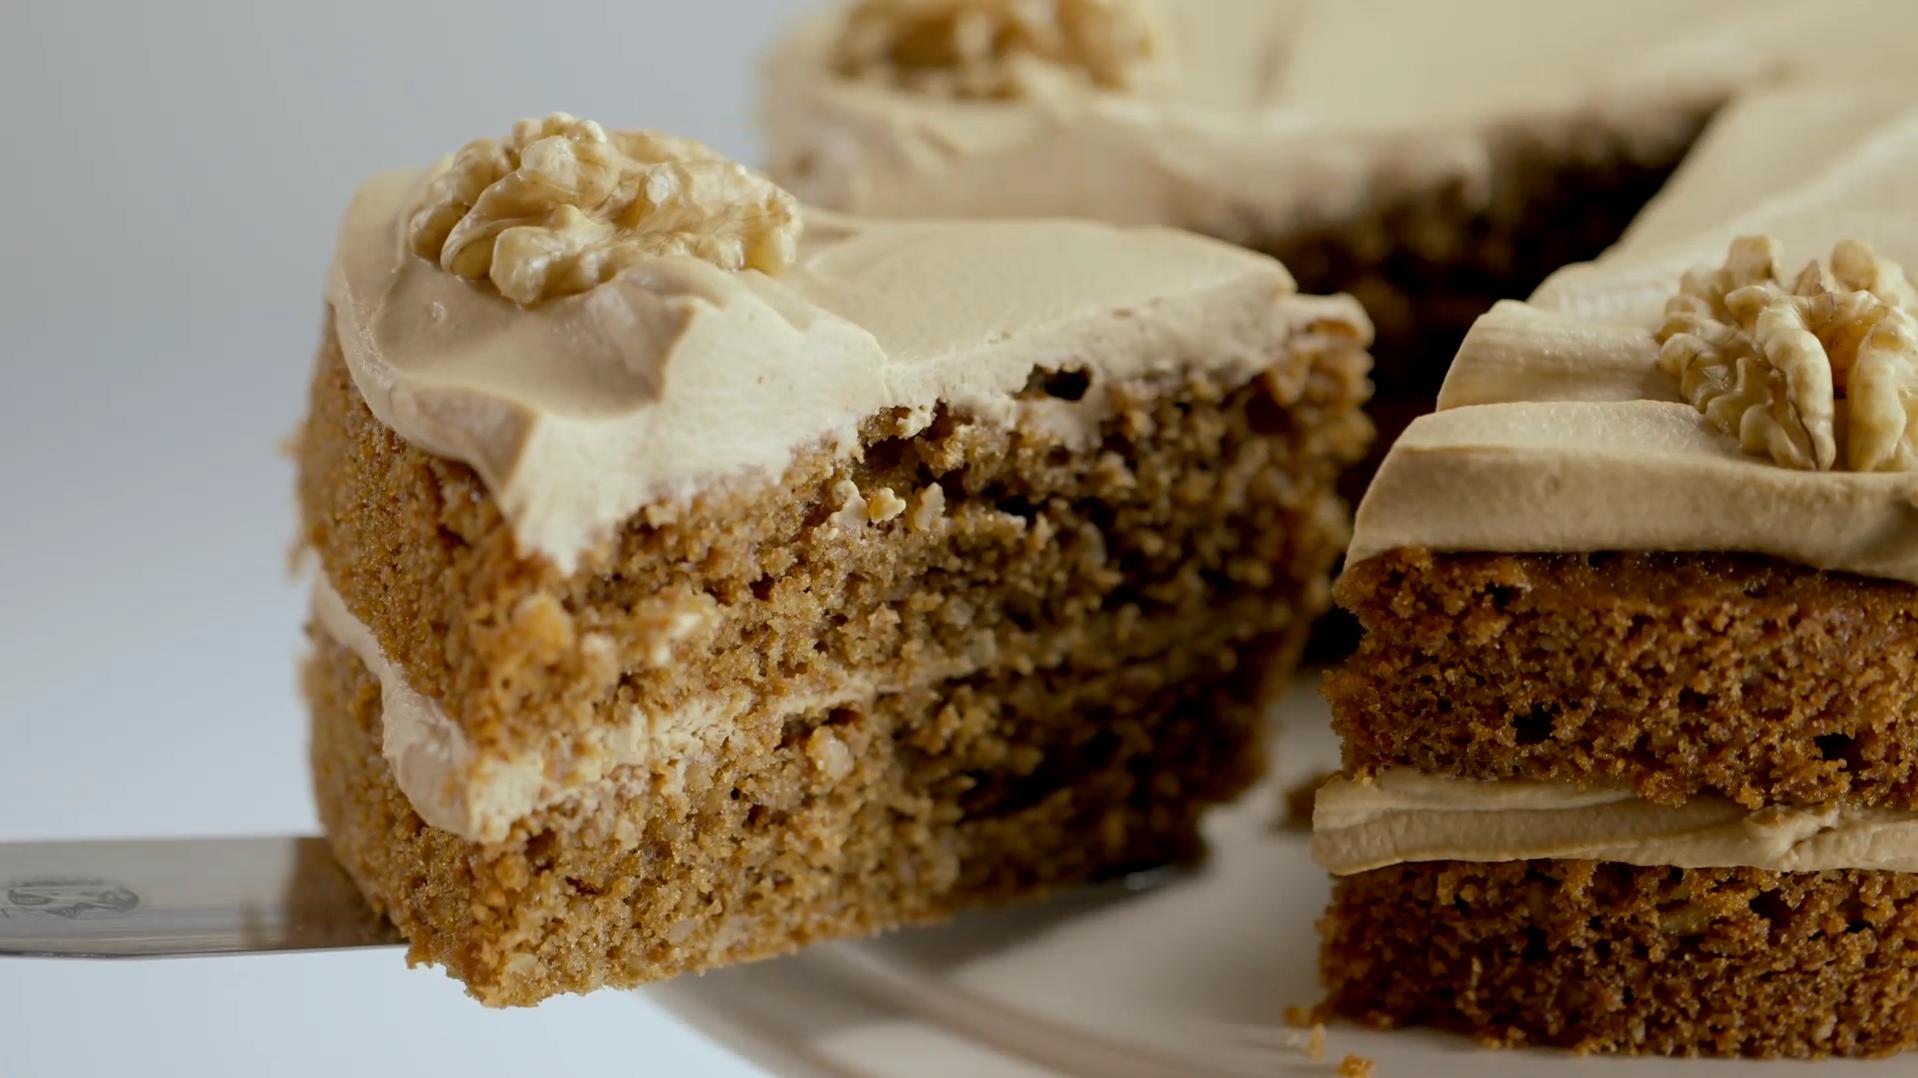  Savory black walnuts and coffee are the stars of this deliciously rich and moist cake.